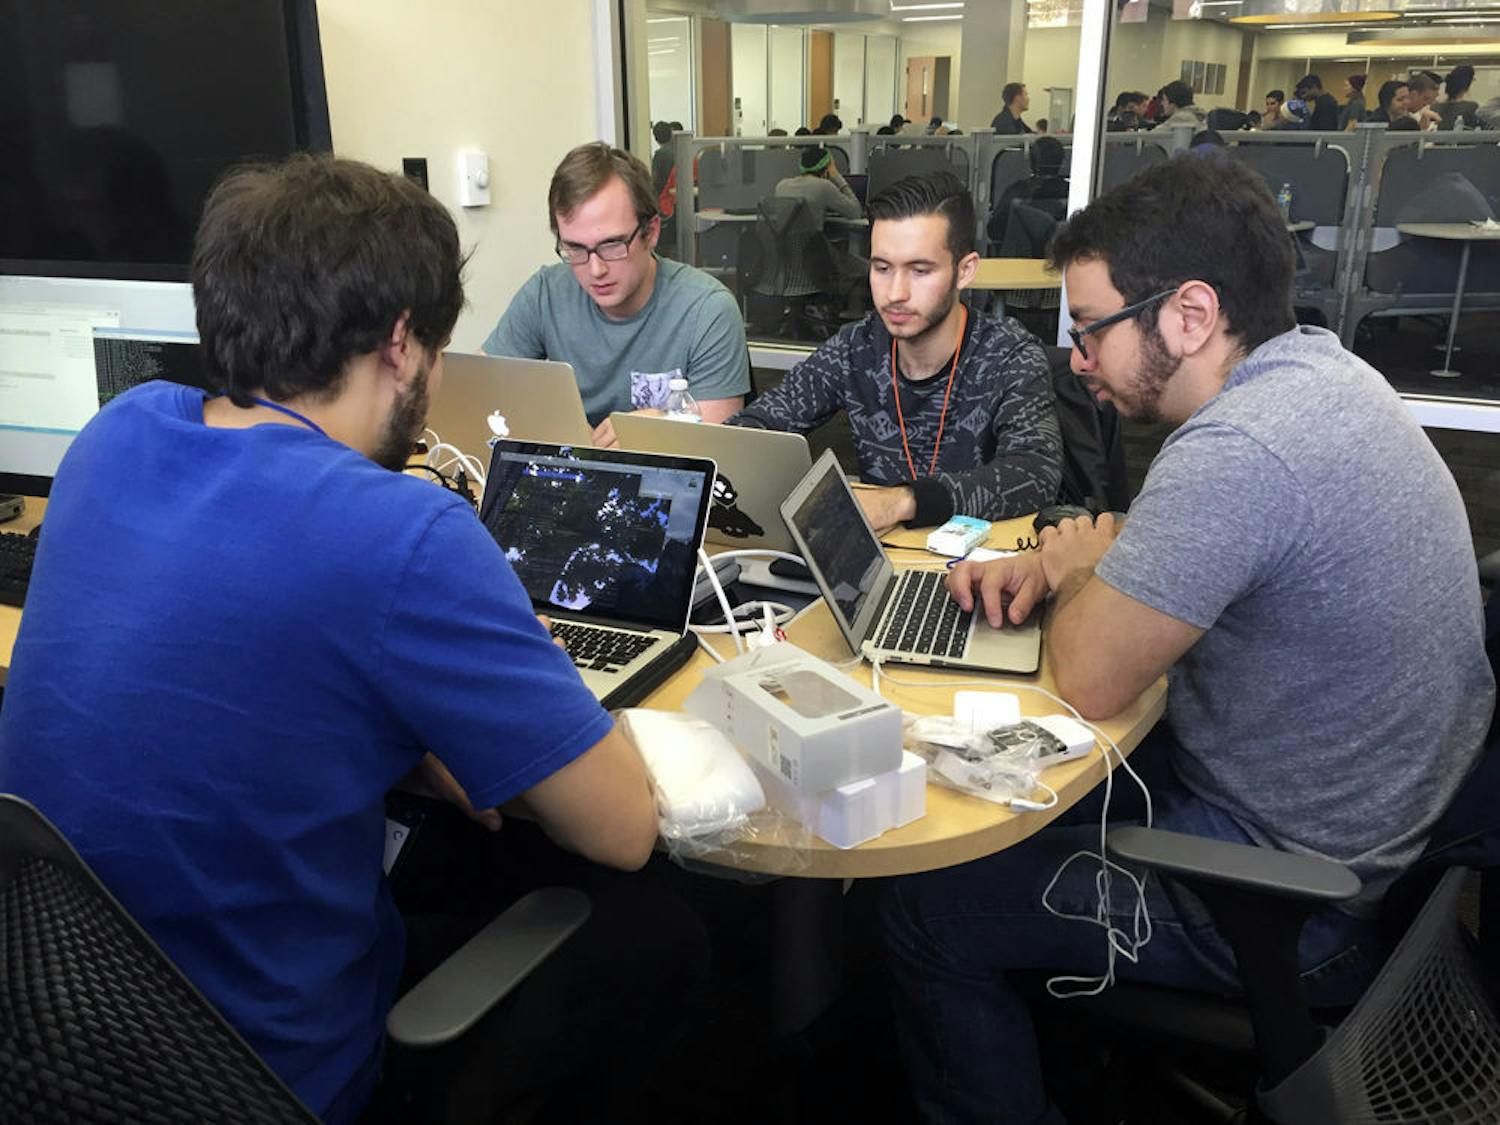 From left: Bradley Treuherz, a 21-year-old UF computer engineering junior, Anthony Colas, a 21-year-old UF computer engineering senior, Sergio Puleri, 20-year-old UF computer science junior, and Max Fresonke, a 21-year-old UF computer engineering junior, compete at SwampHacks on Saturday. The team won second place for their program, which recognizes people's faces and plays their favorite song.